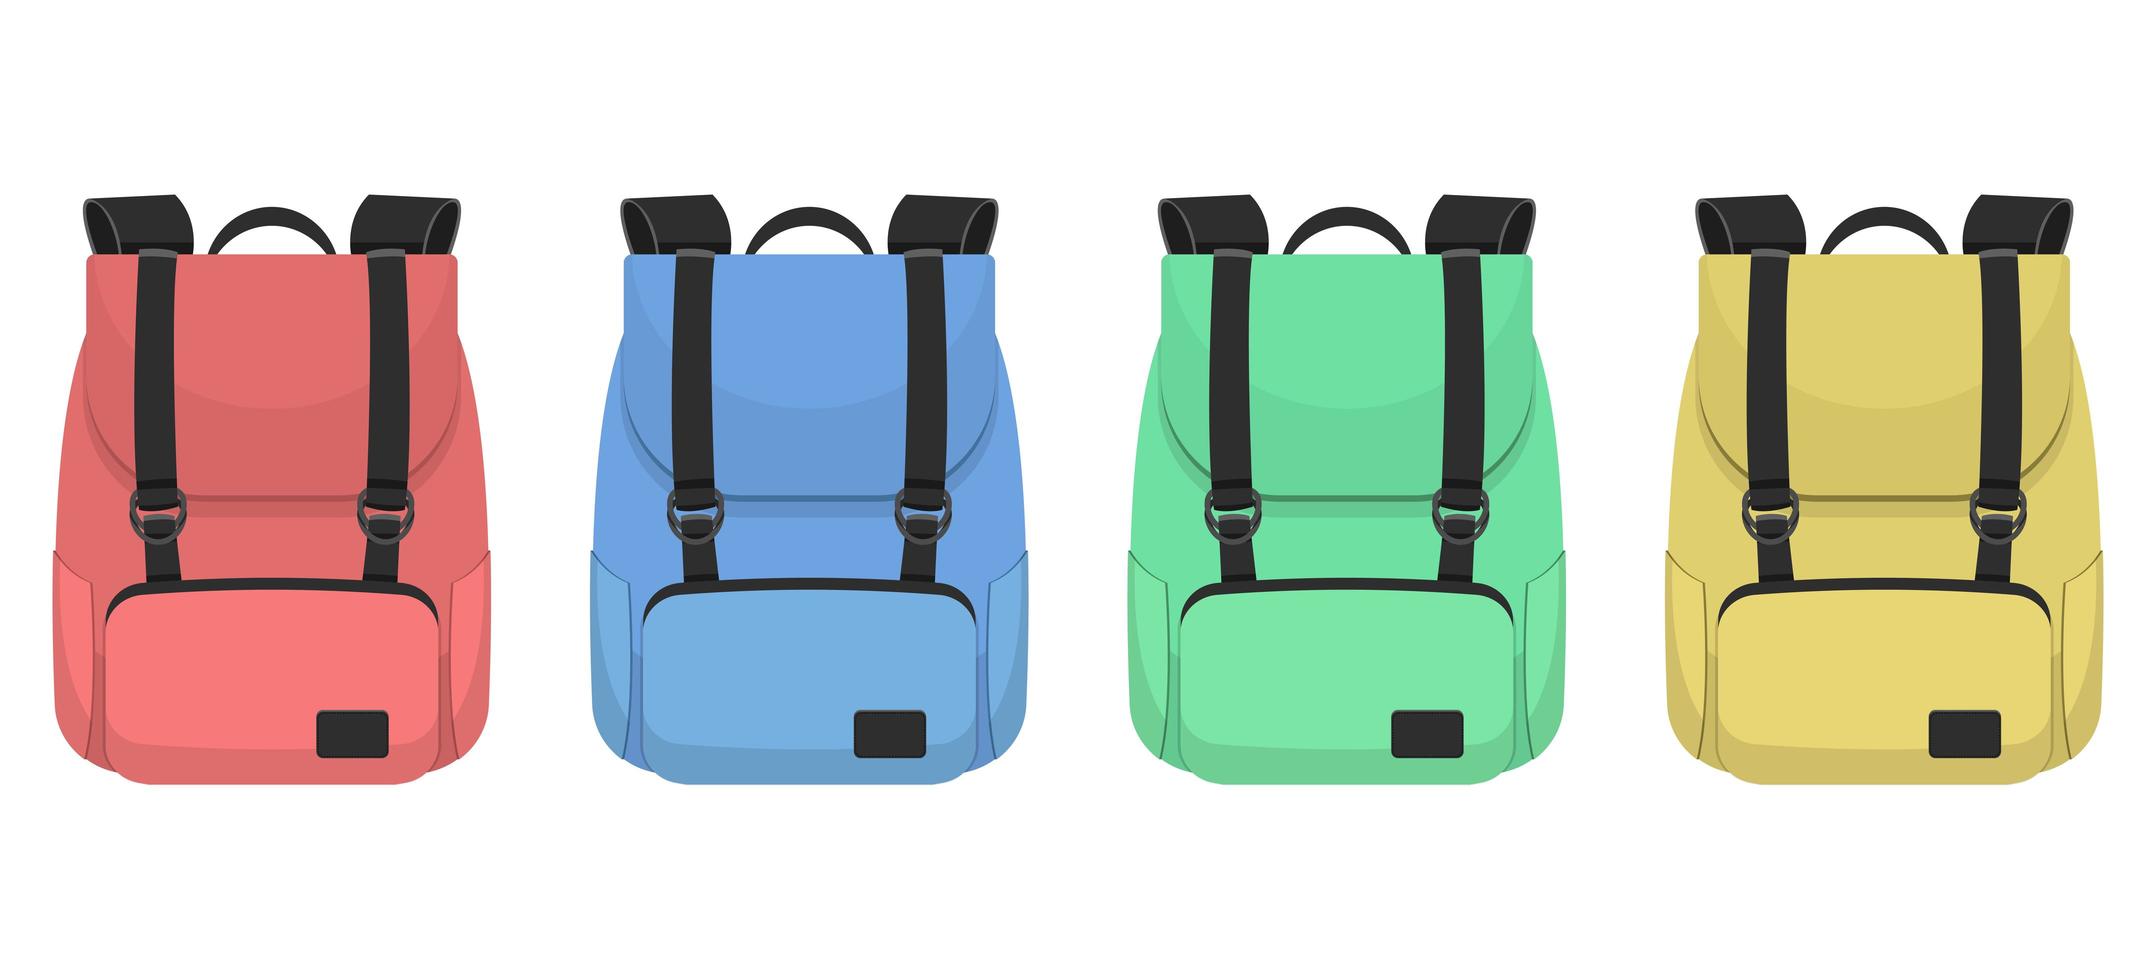 Backpack set isolated on white background vector